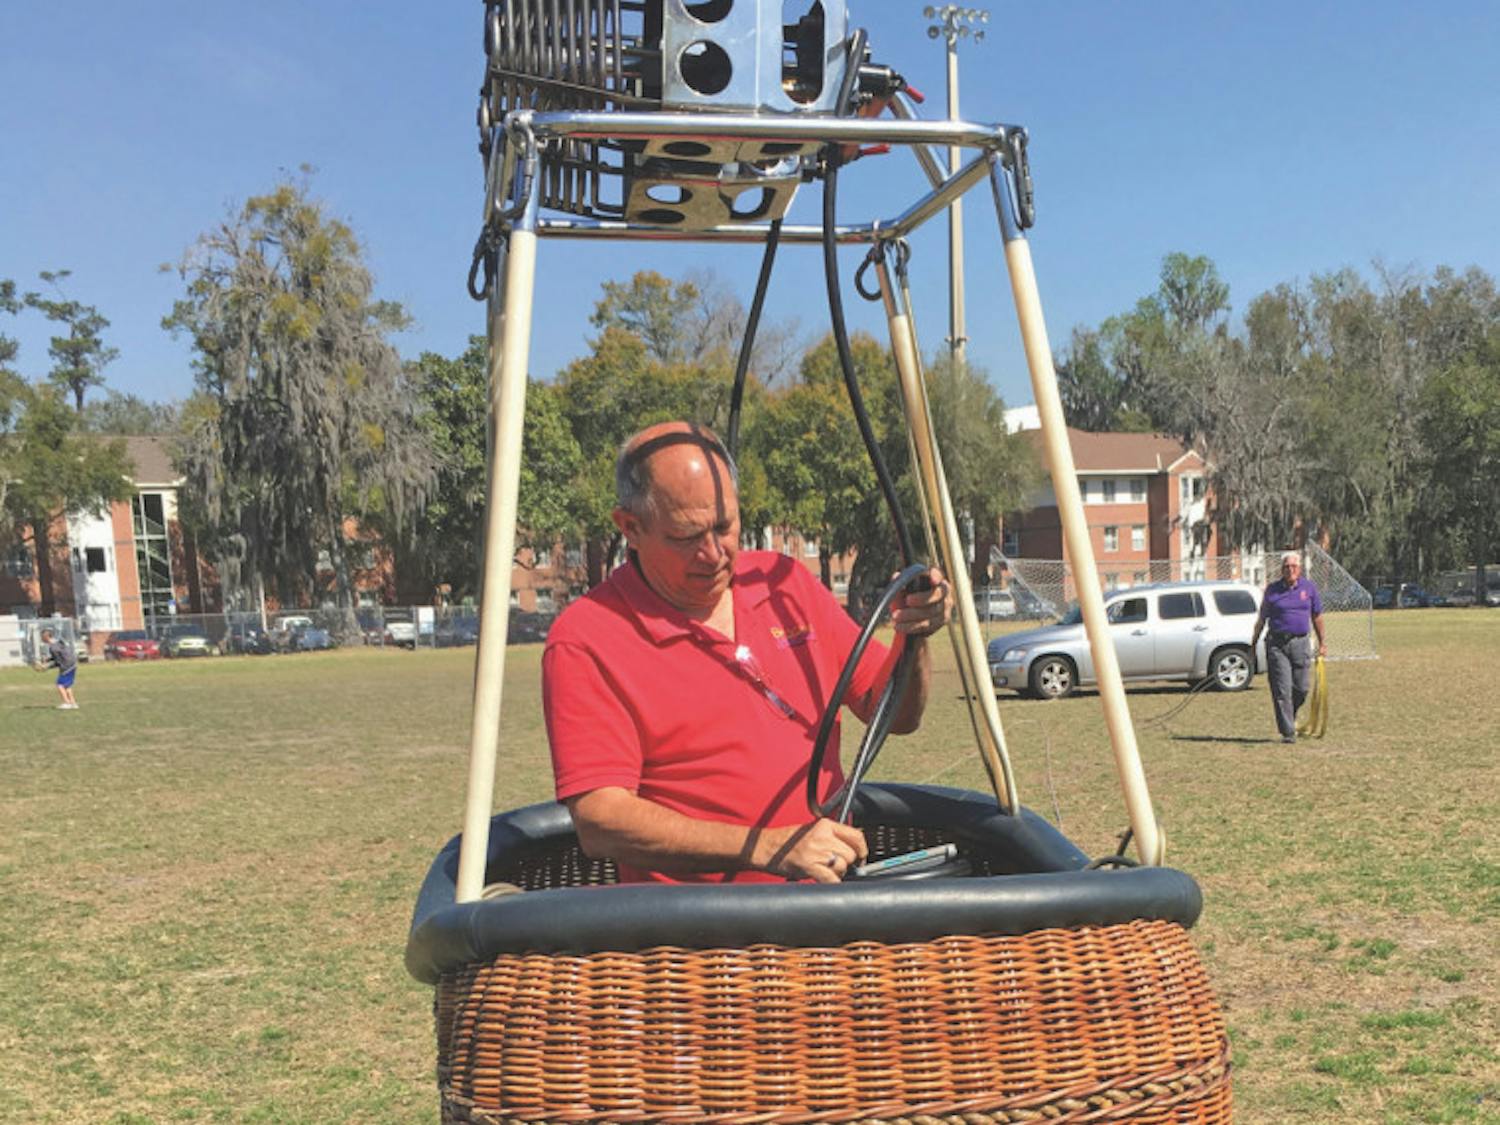 Bob Carlton, the owner of Balloons and Beyond, disassembles his hot air balloon on Flavet Field after about an hour and half of balloon rides on Friday. Carlton volunteered to bring his balloon to help raise awareness of mental health at the Onward and Upward event, hosted by the UF Bateman team.
&nbsp;